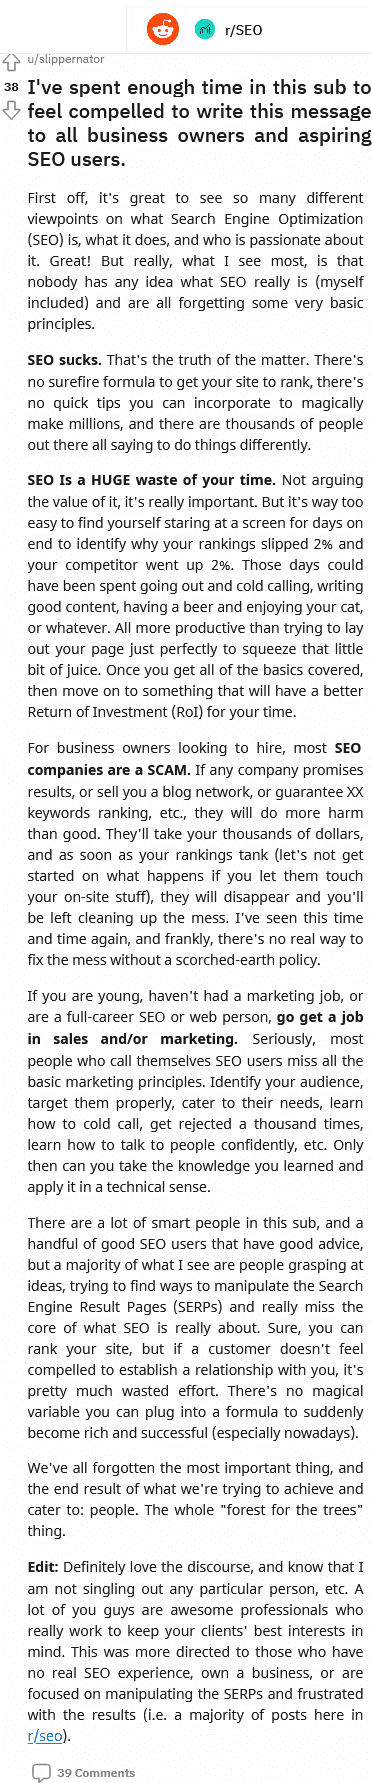 when did you think that seo scams